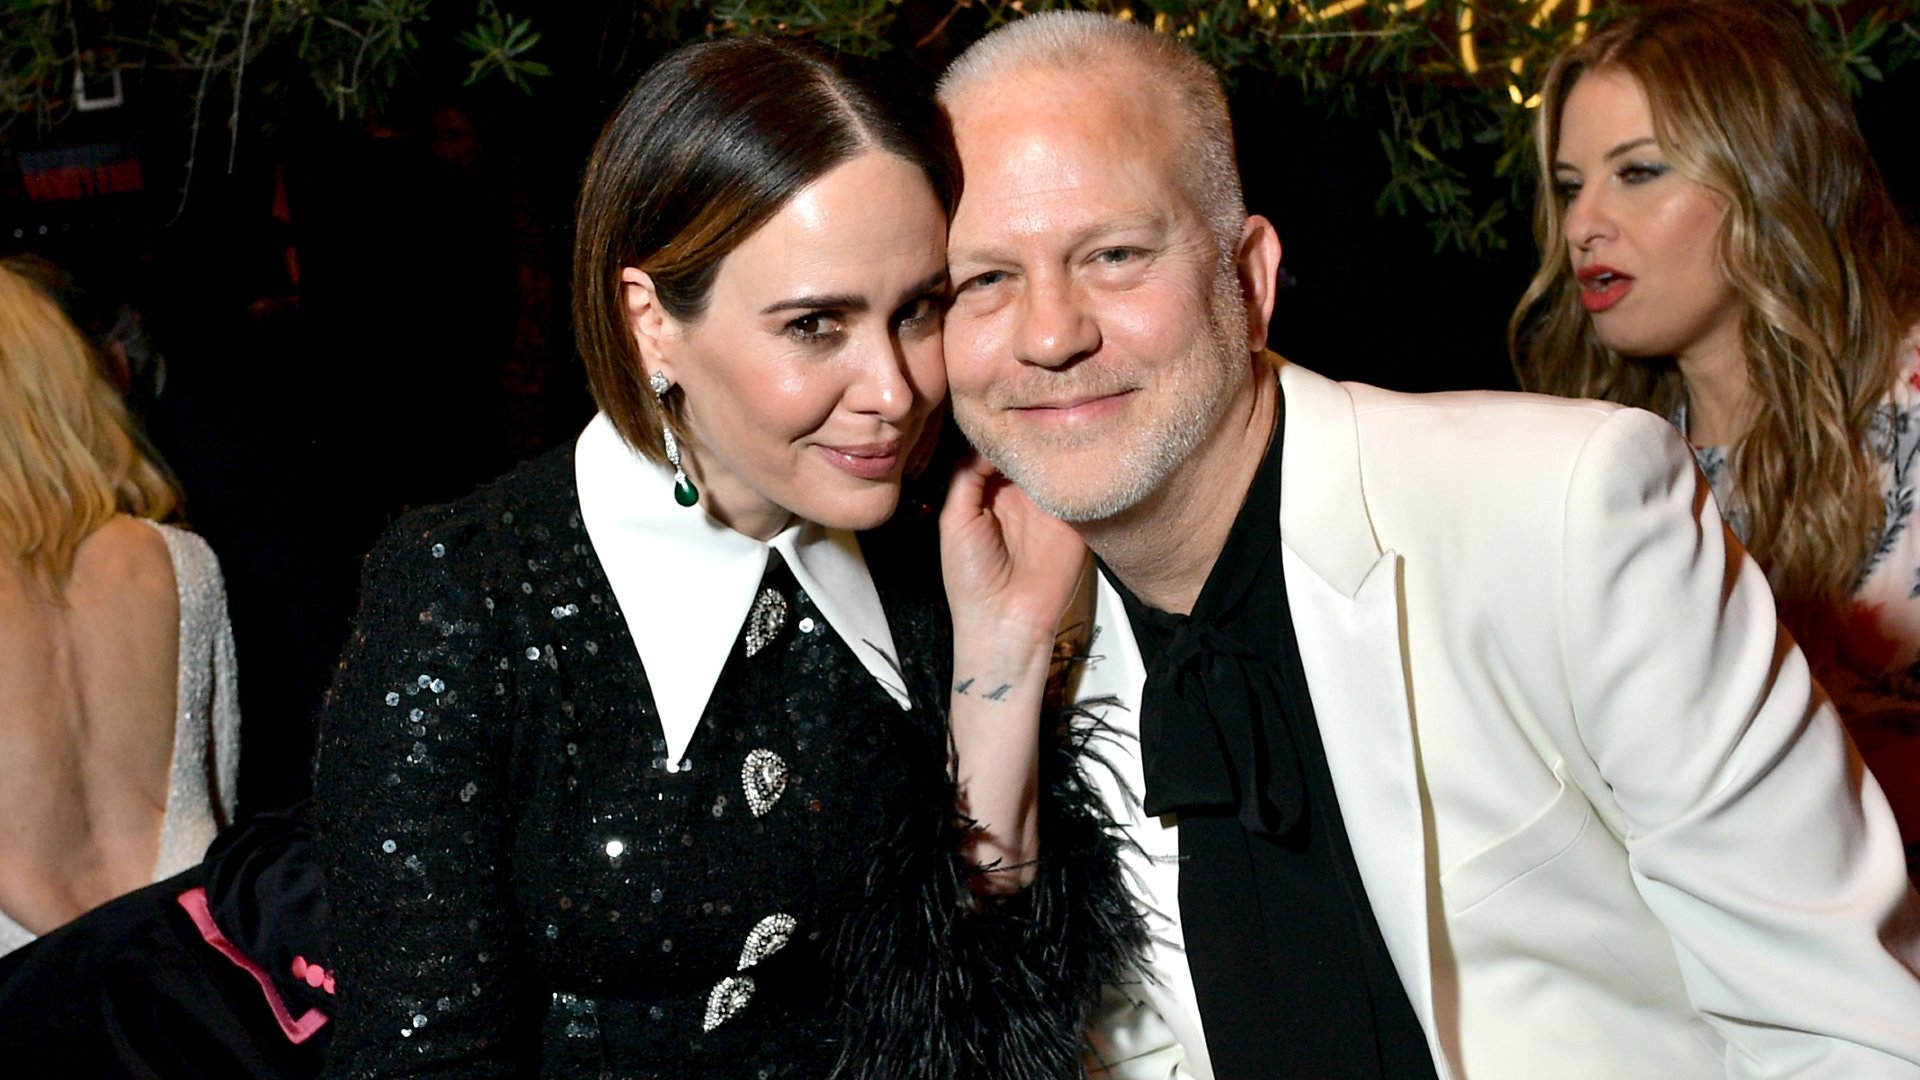 'American Horror Story' co-creator Ryan Murphy and actor Sarah Paulson at the Vanity Fair Oscar Party in 2020